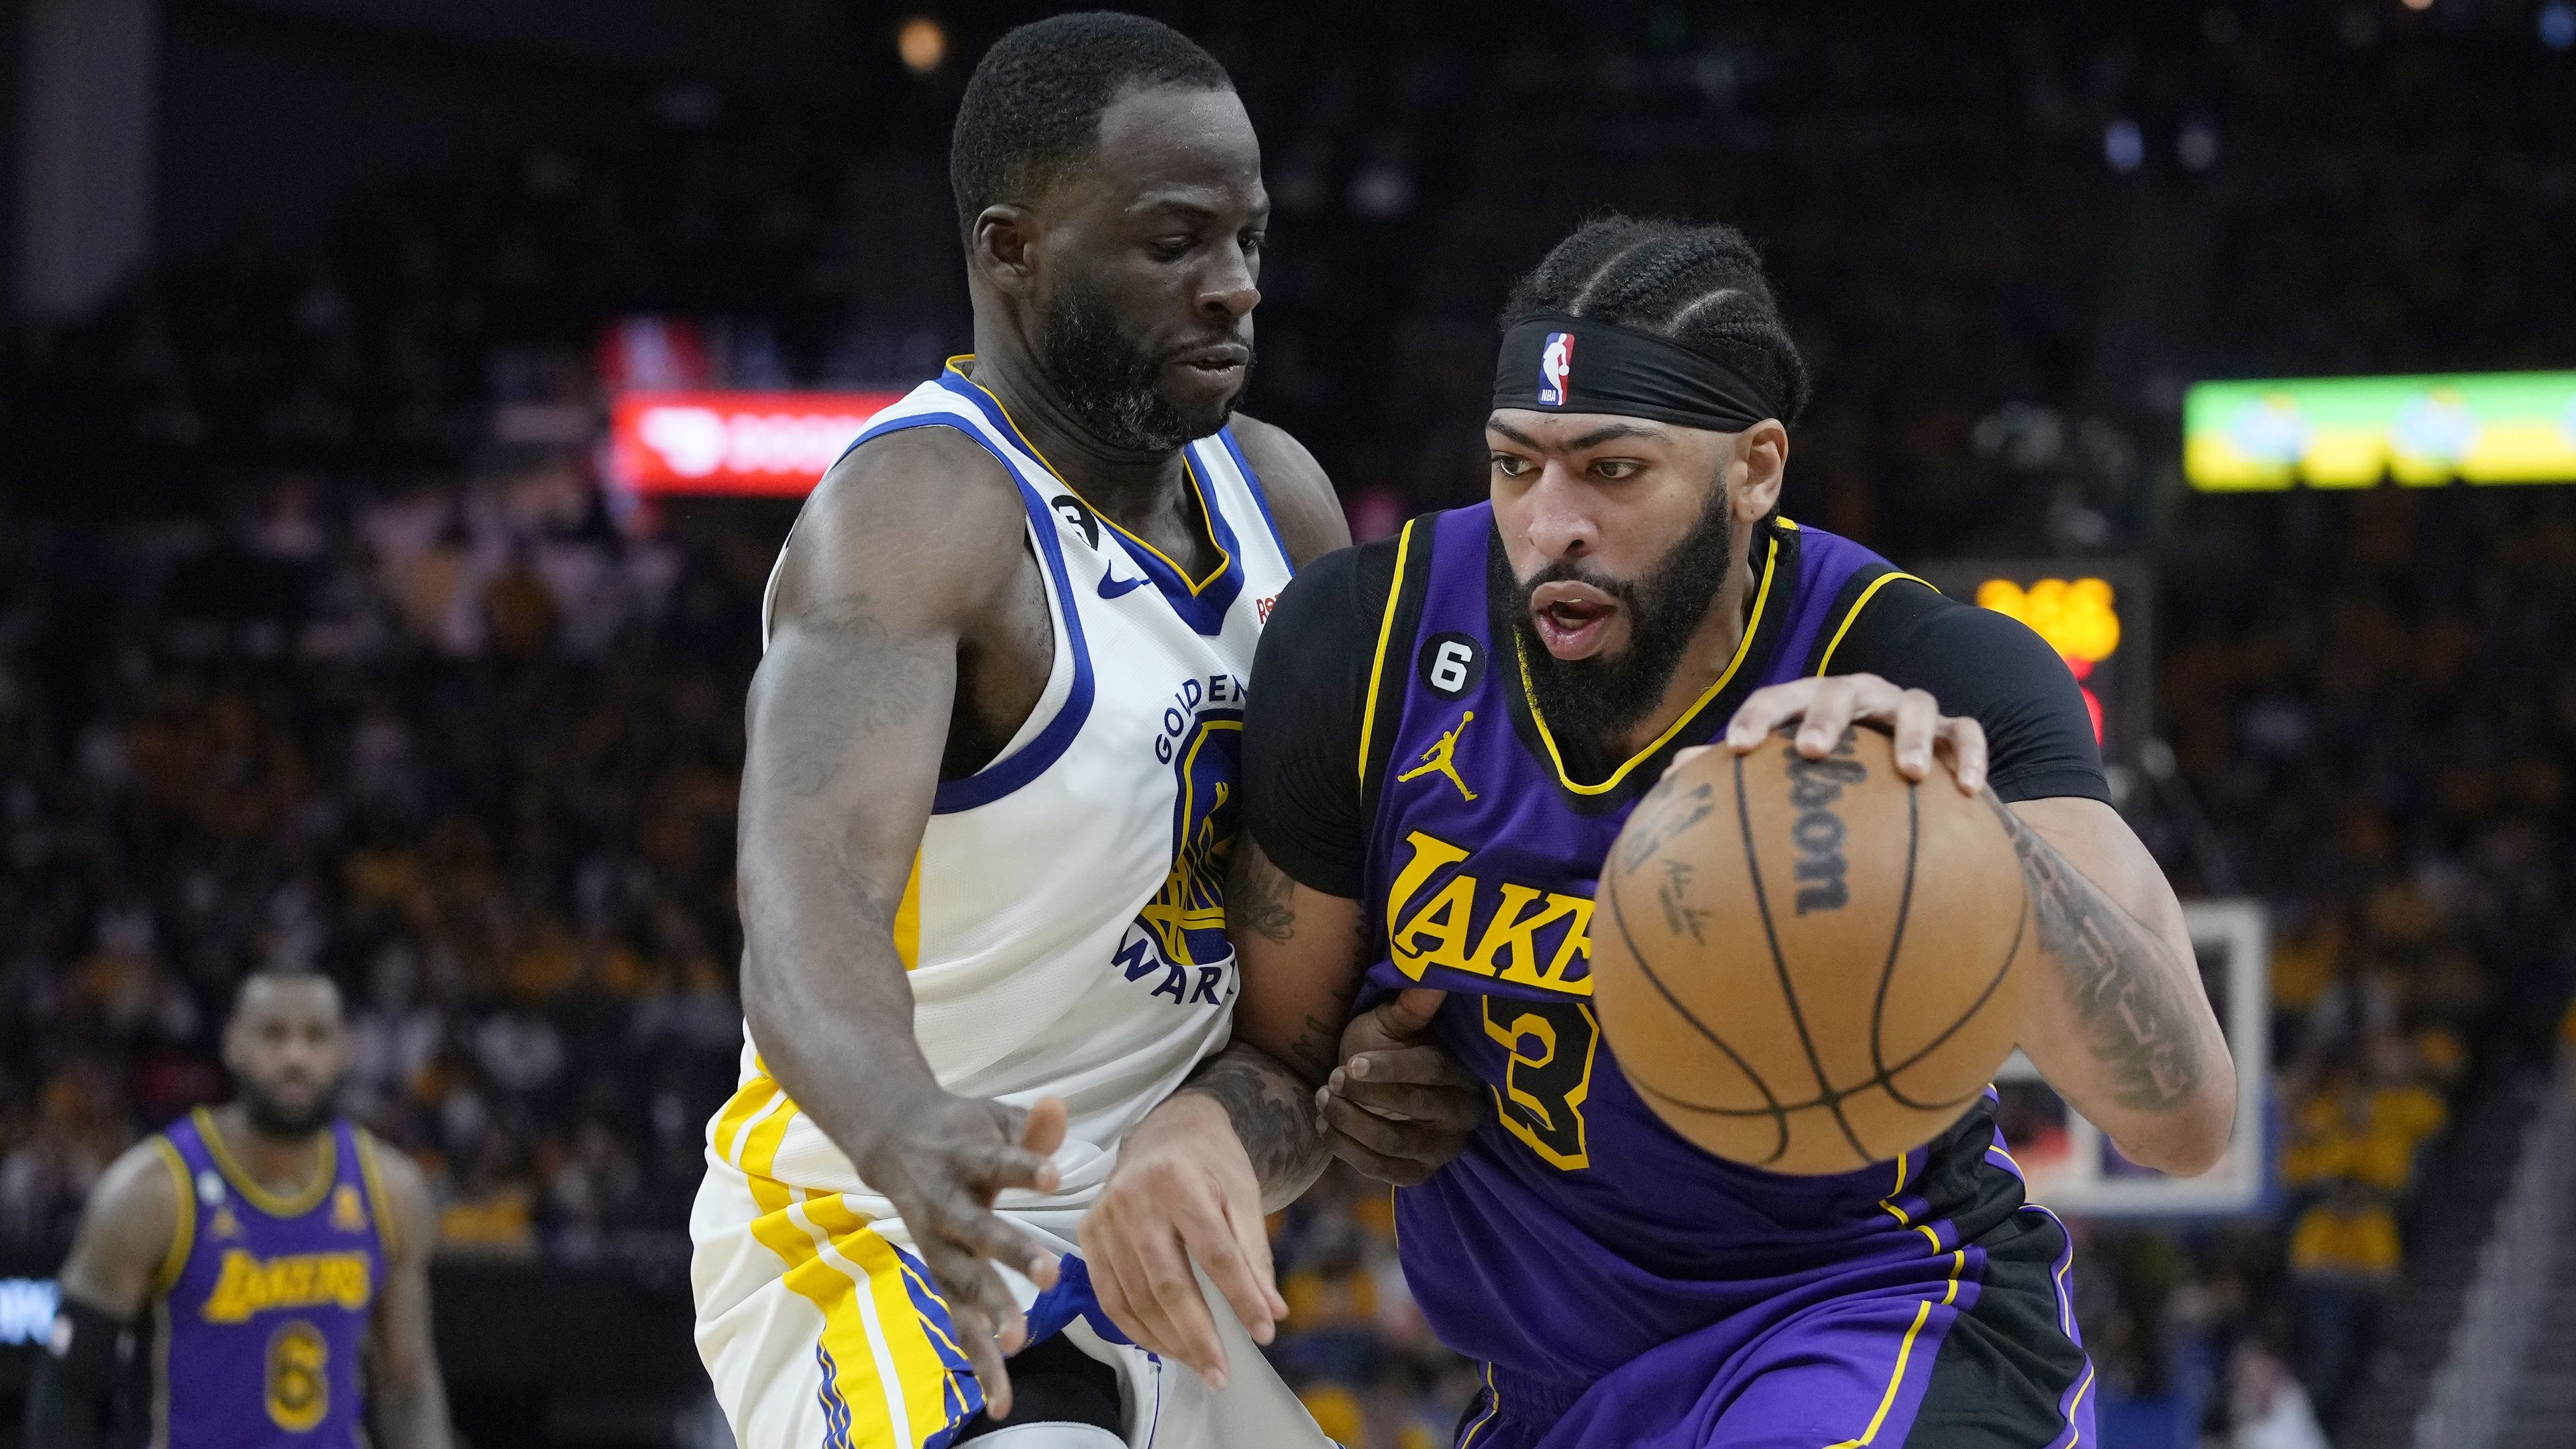 Lakers star Anthony Davis is defended by Draymond Green of the Warriors.